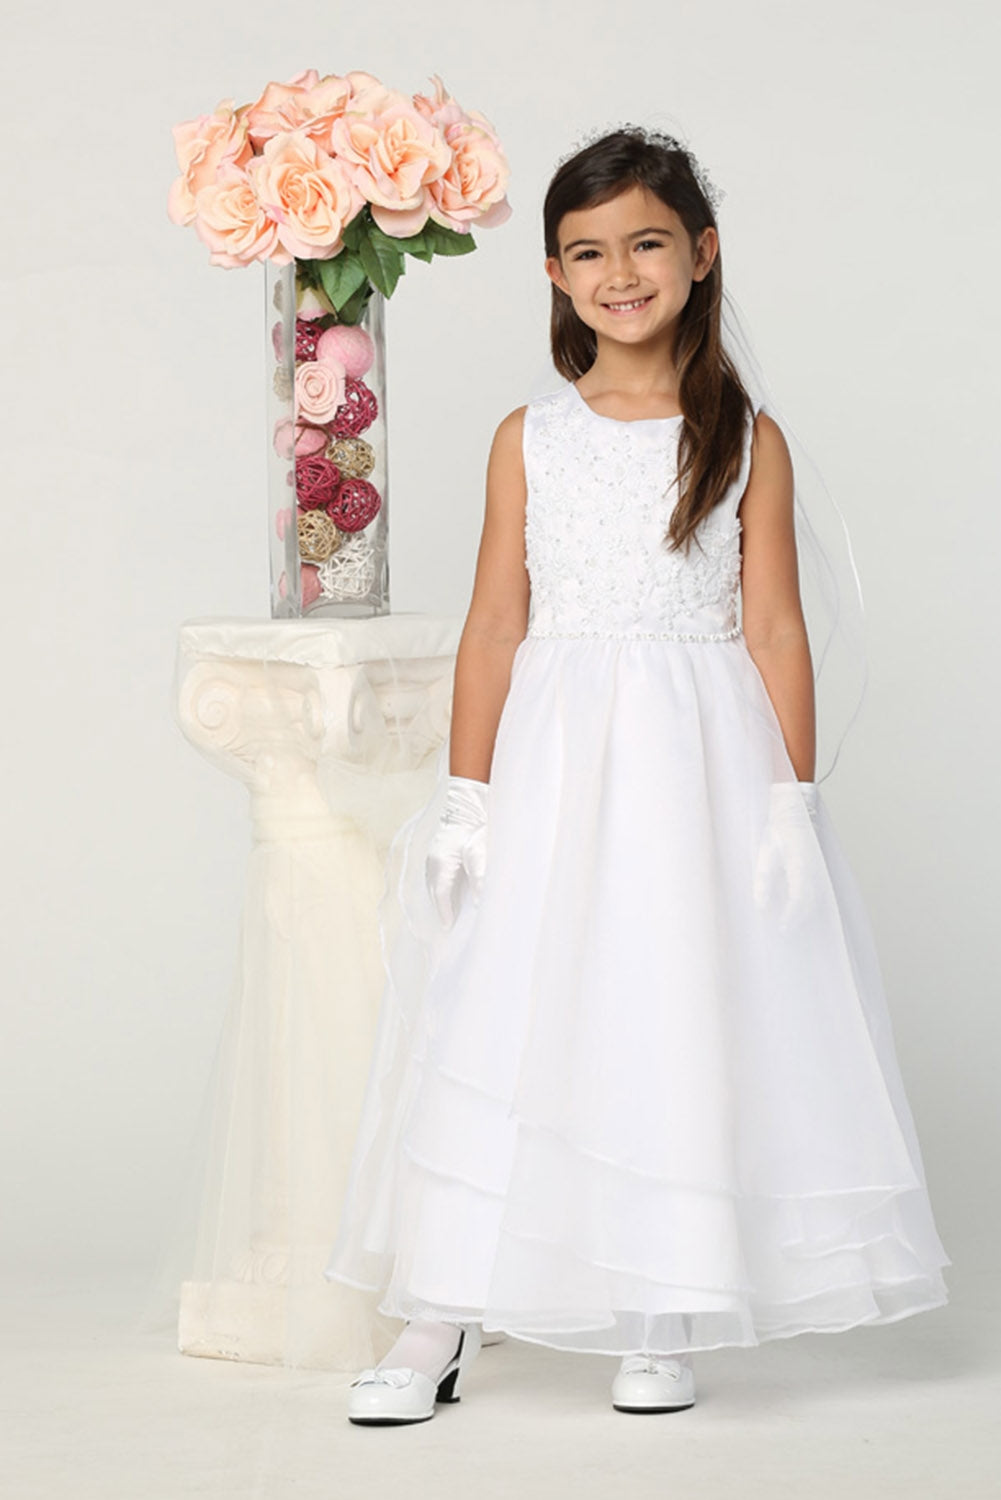 Beaded Embroidered Applique Communion Dress with Organza Skirt – SP604